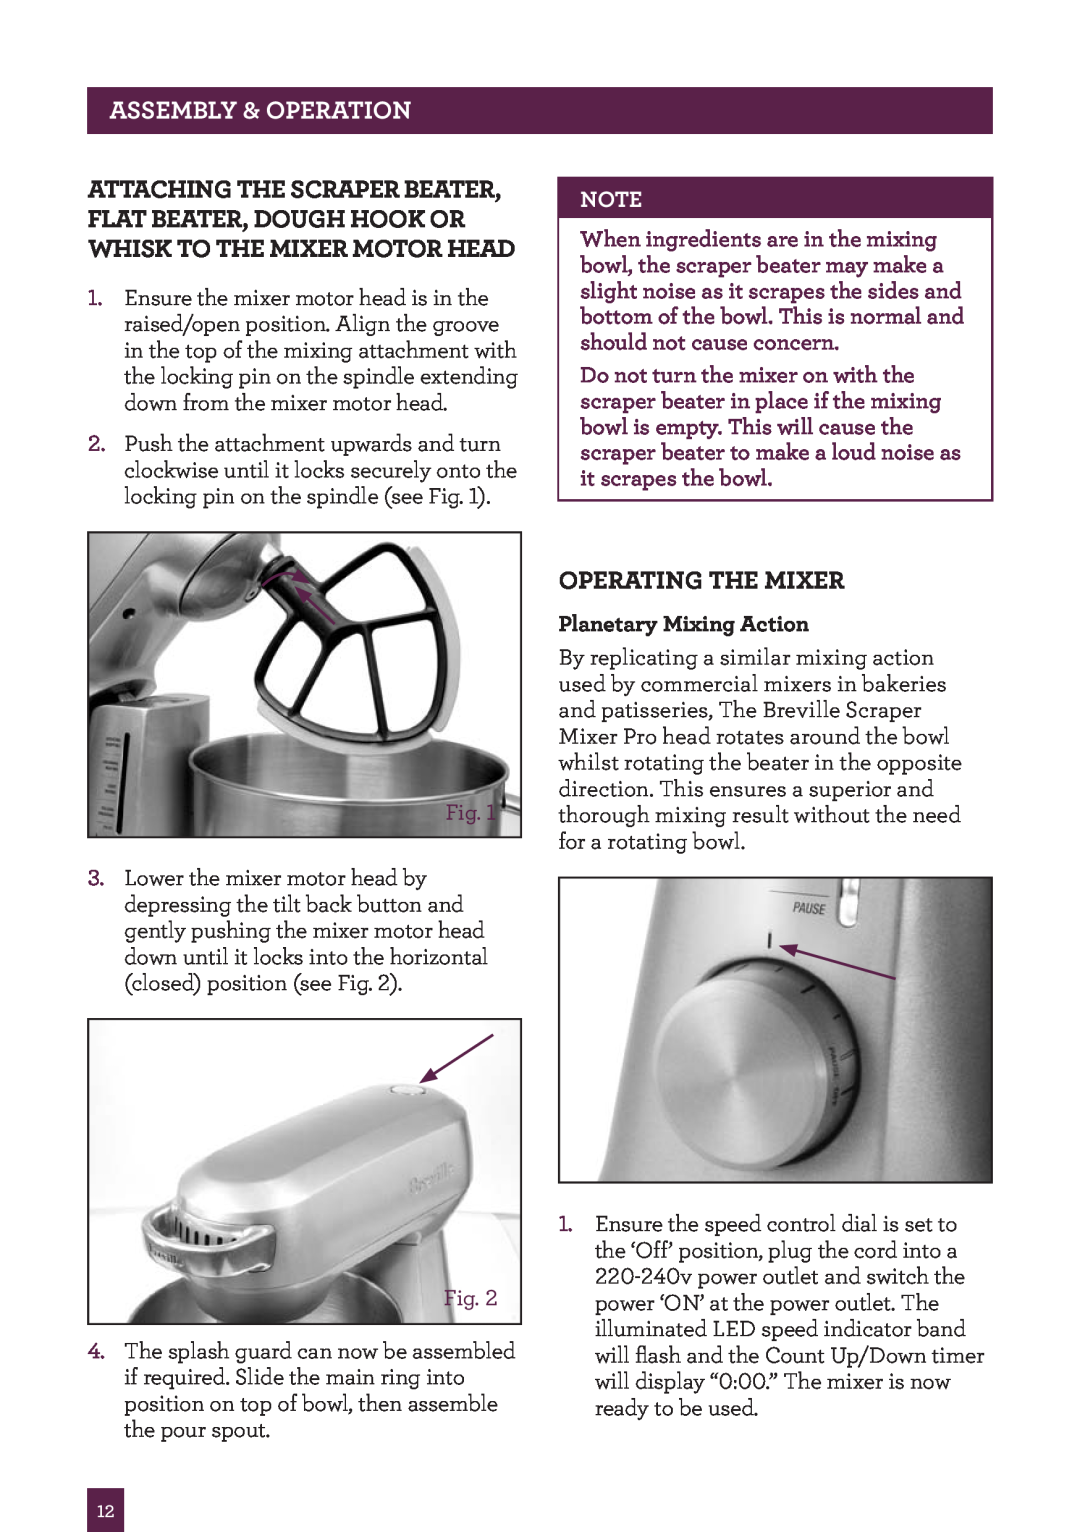 Breville BEM800 brochure Attaching the scraper beater, FLAT BEATER, DOUGH HOOK OR WHISK to the mixer motor head 